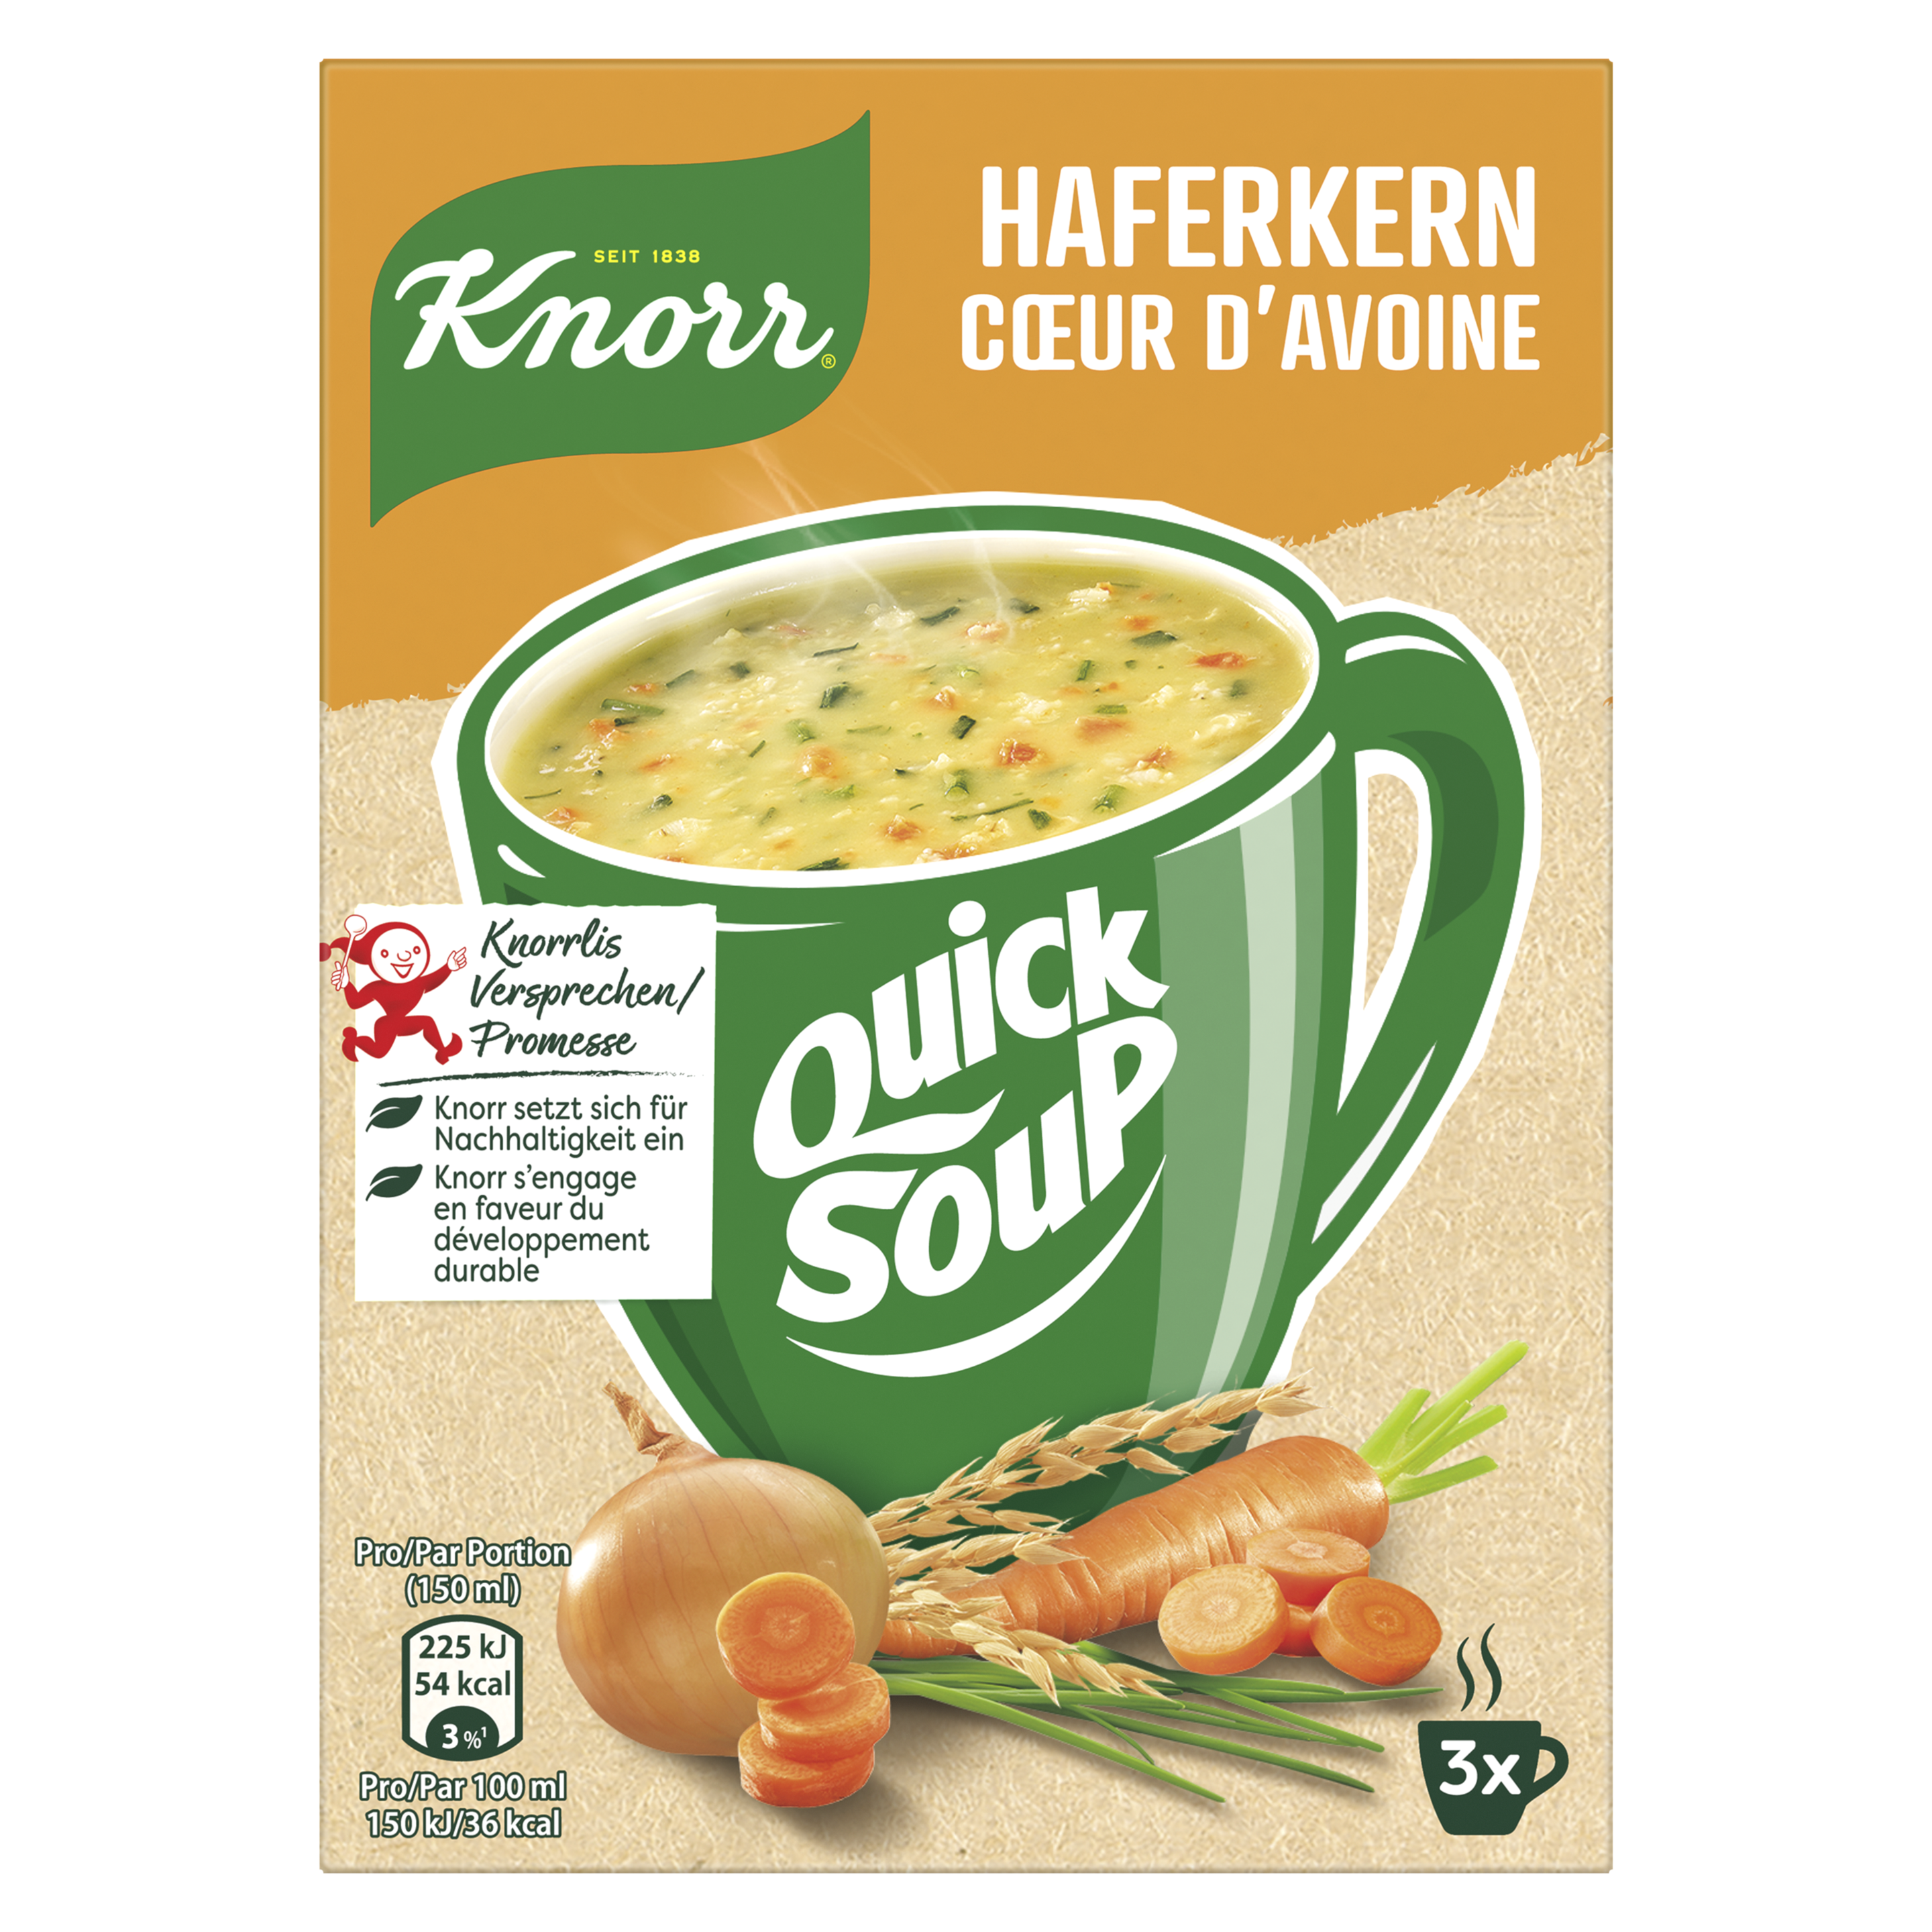 KNORR Quick Soup Haferkern Packung 3 x 1 Portion